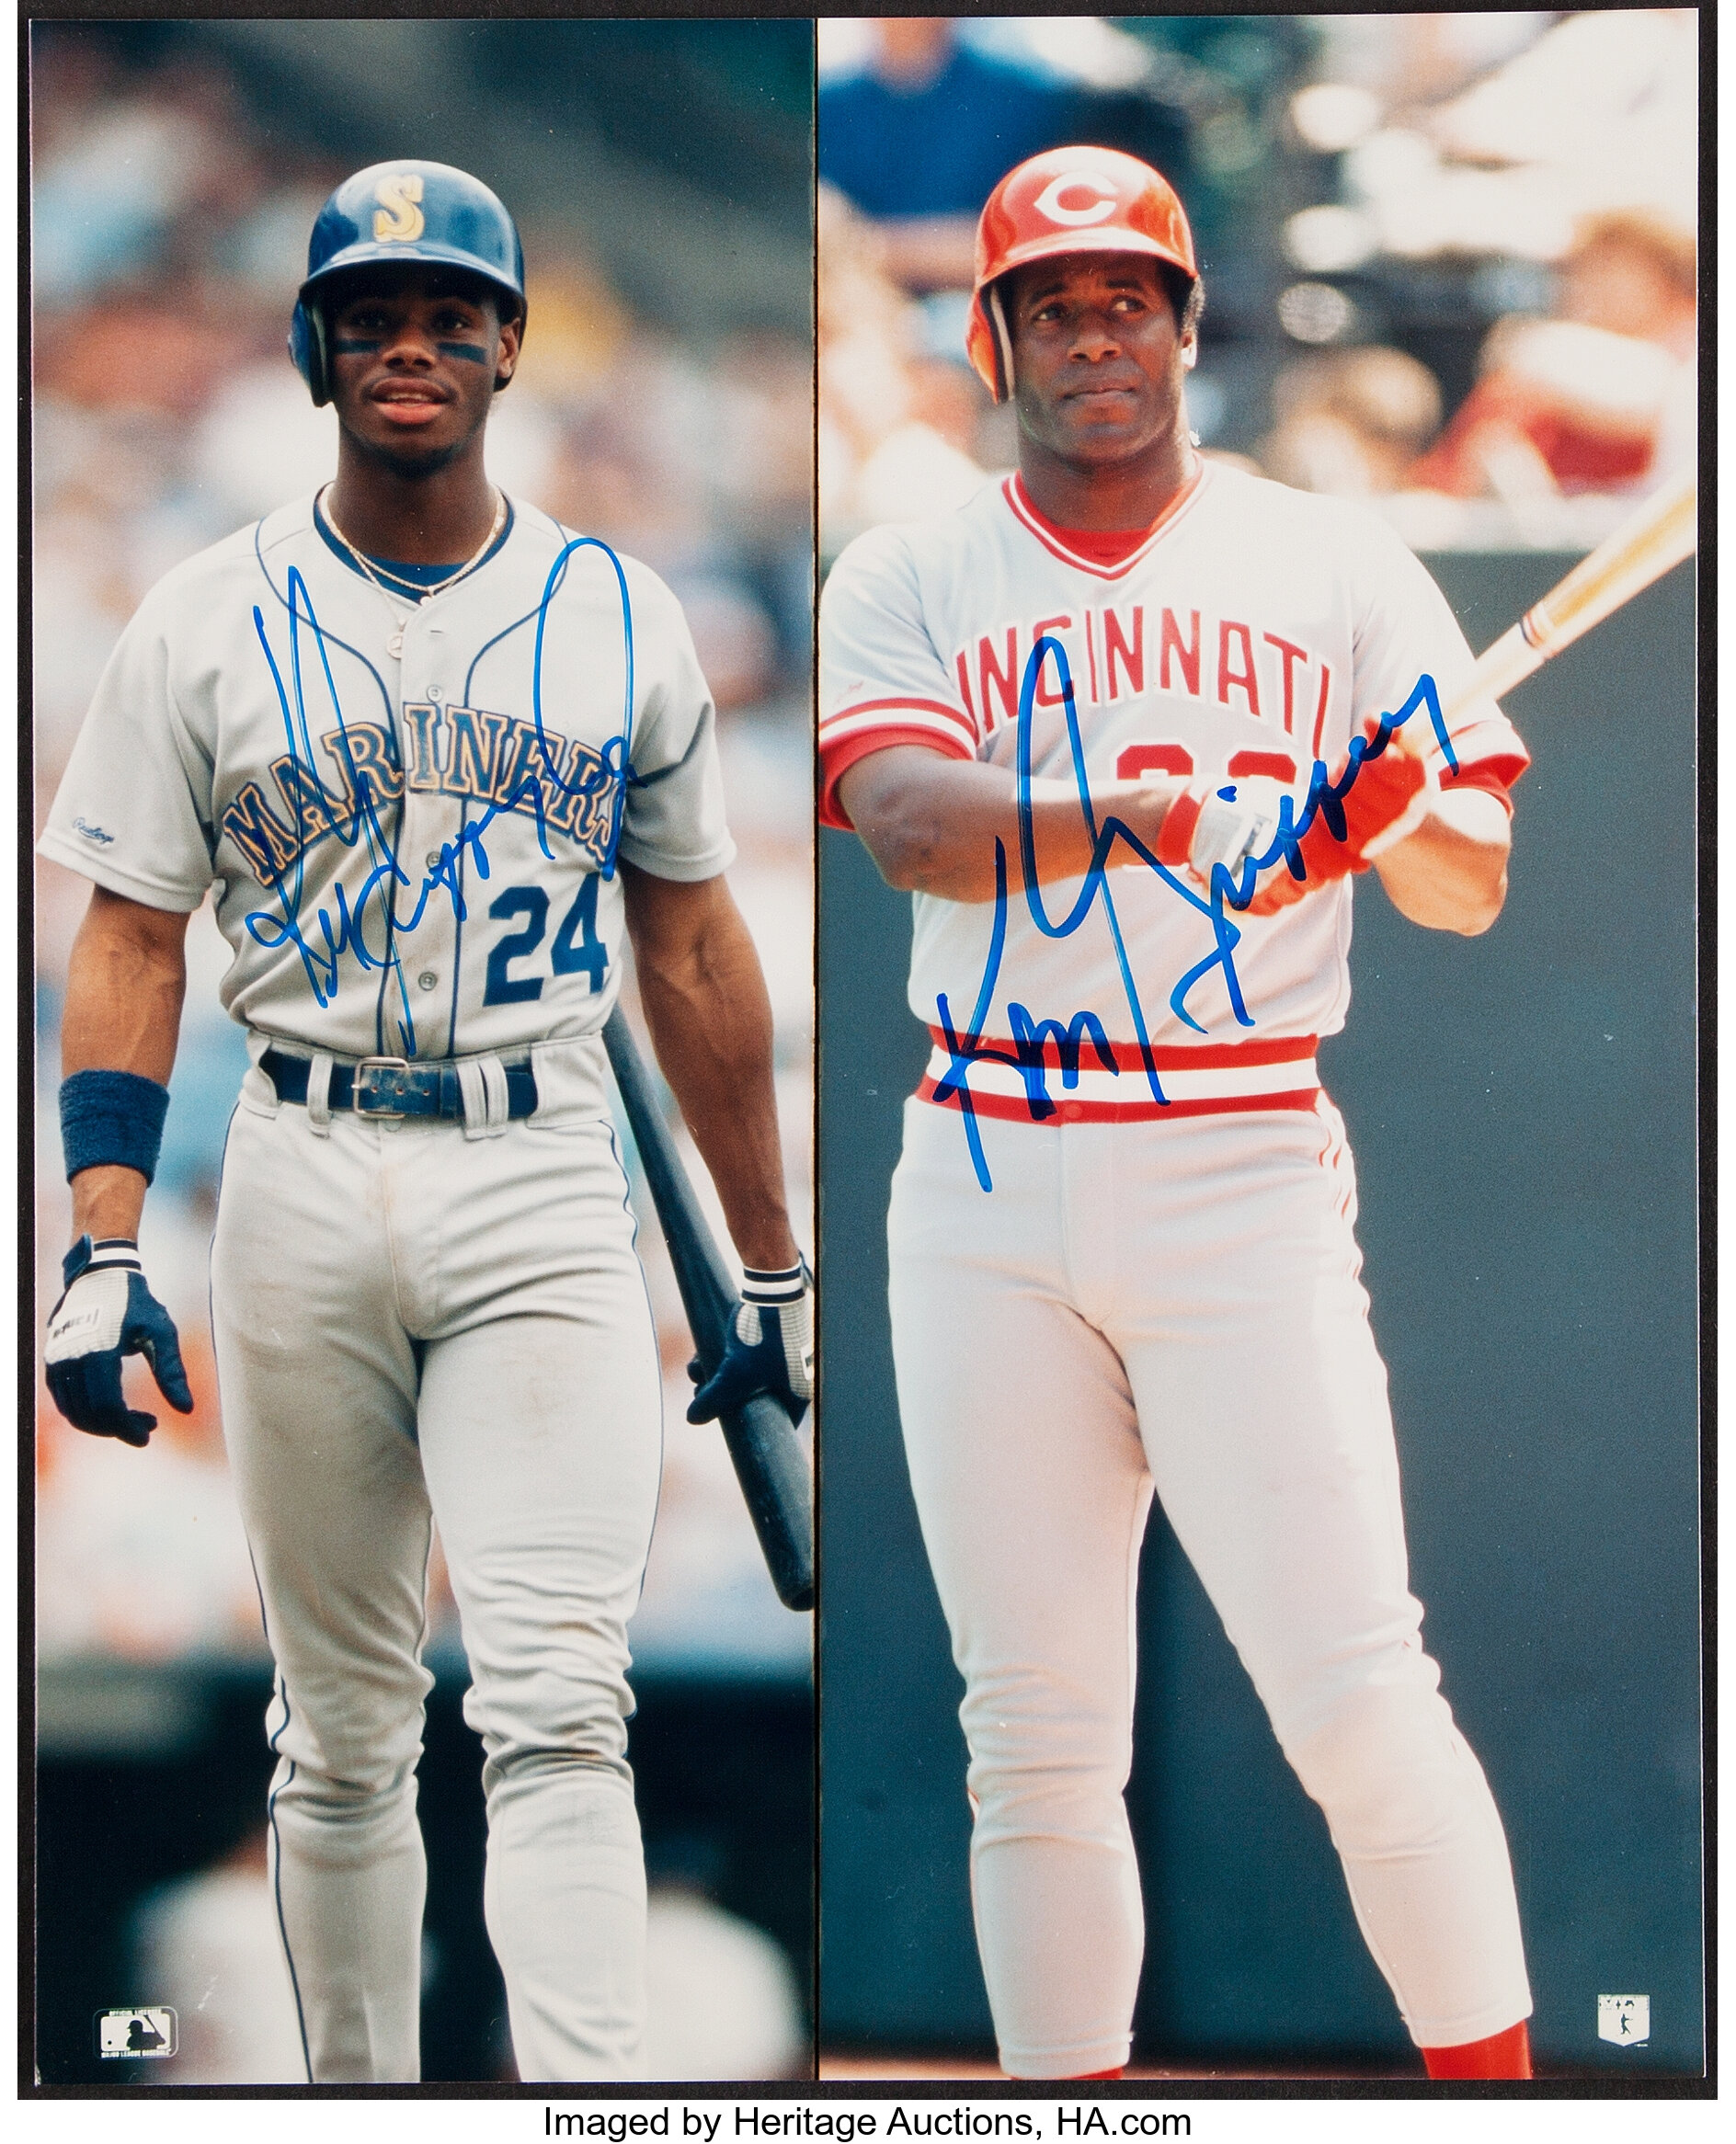 Lot - DUAL SIGNED Ken Griffey and Ken Griffey, Jr. Poster.